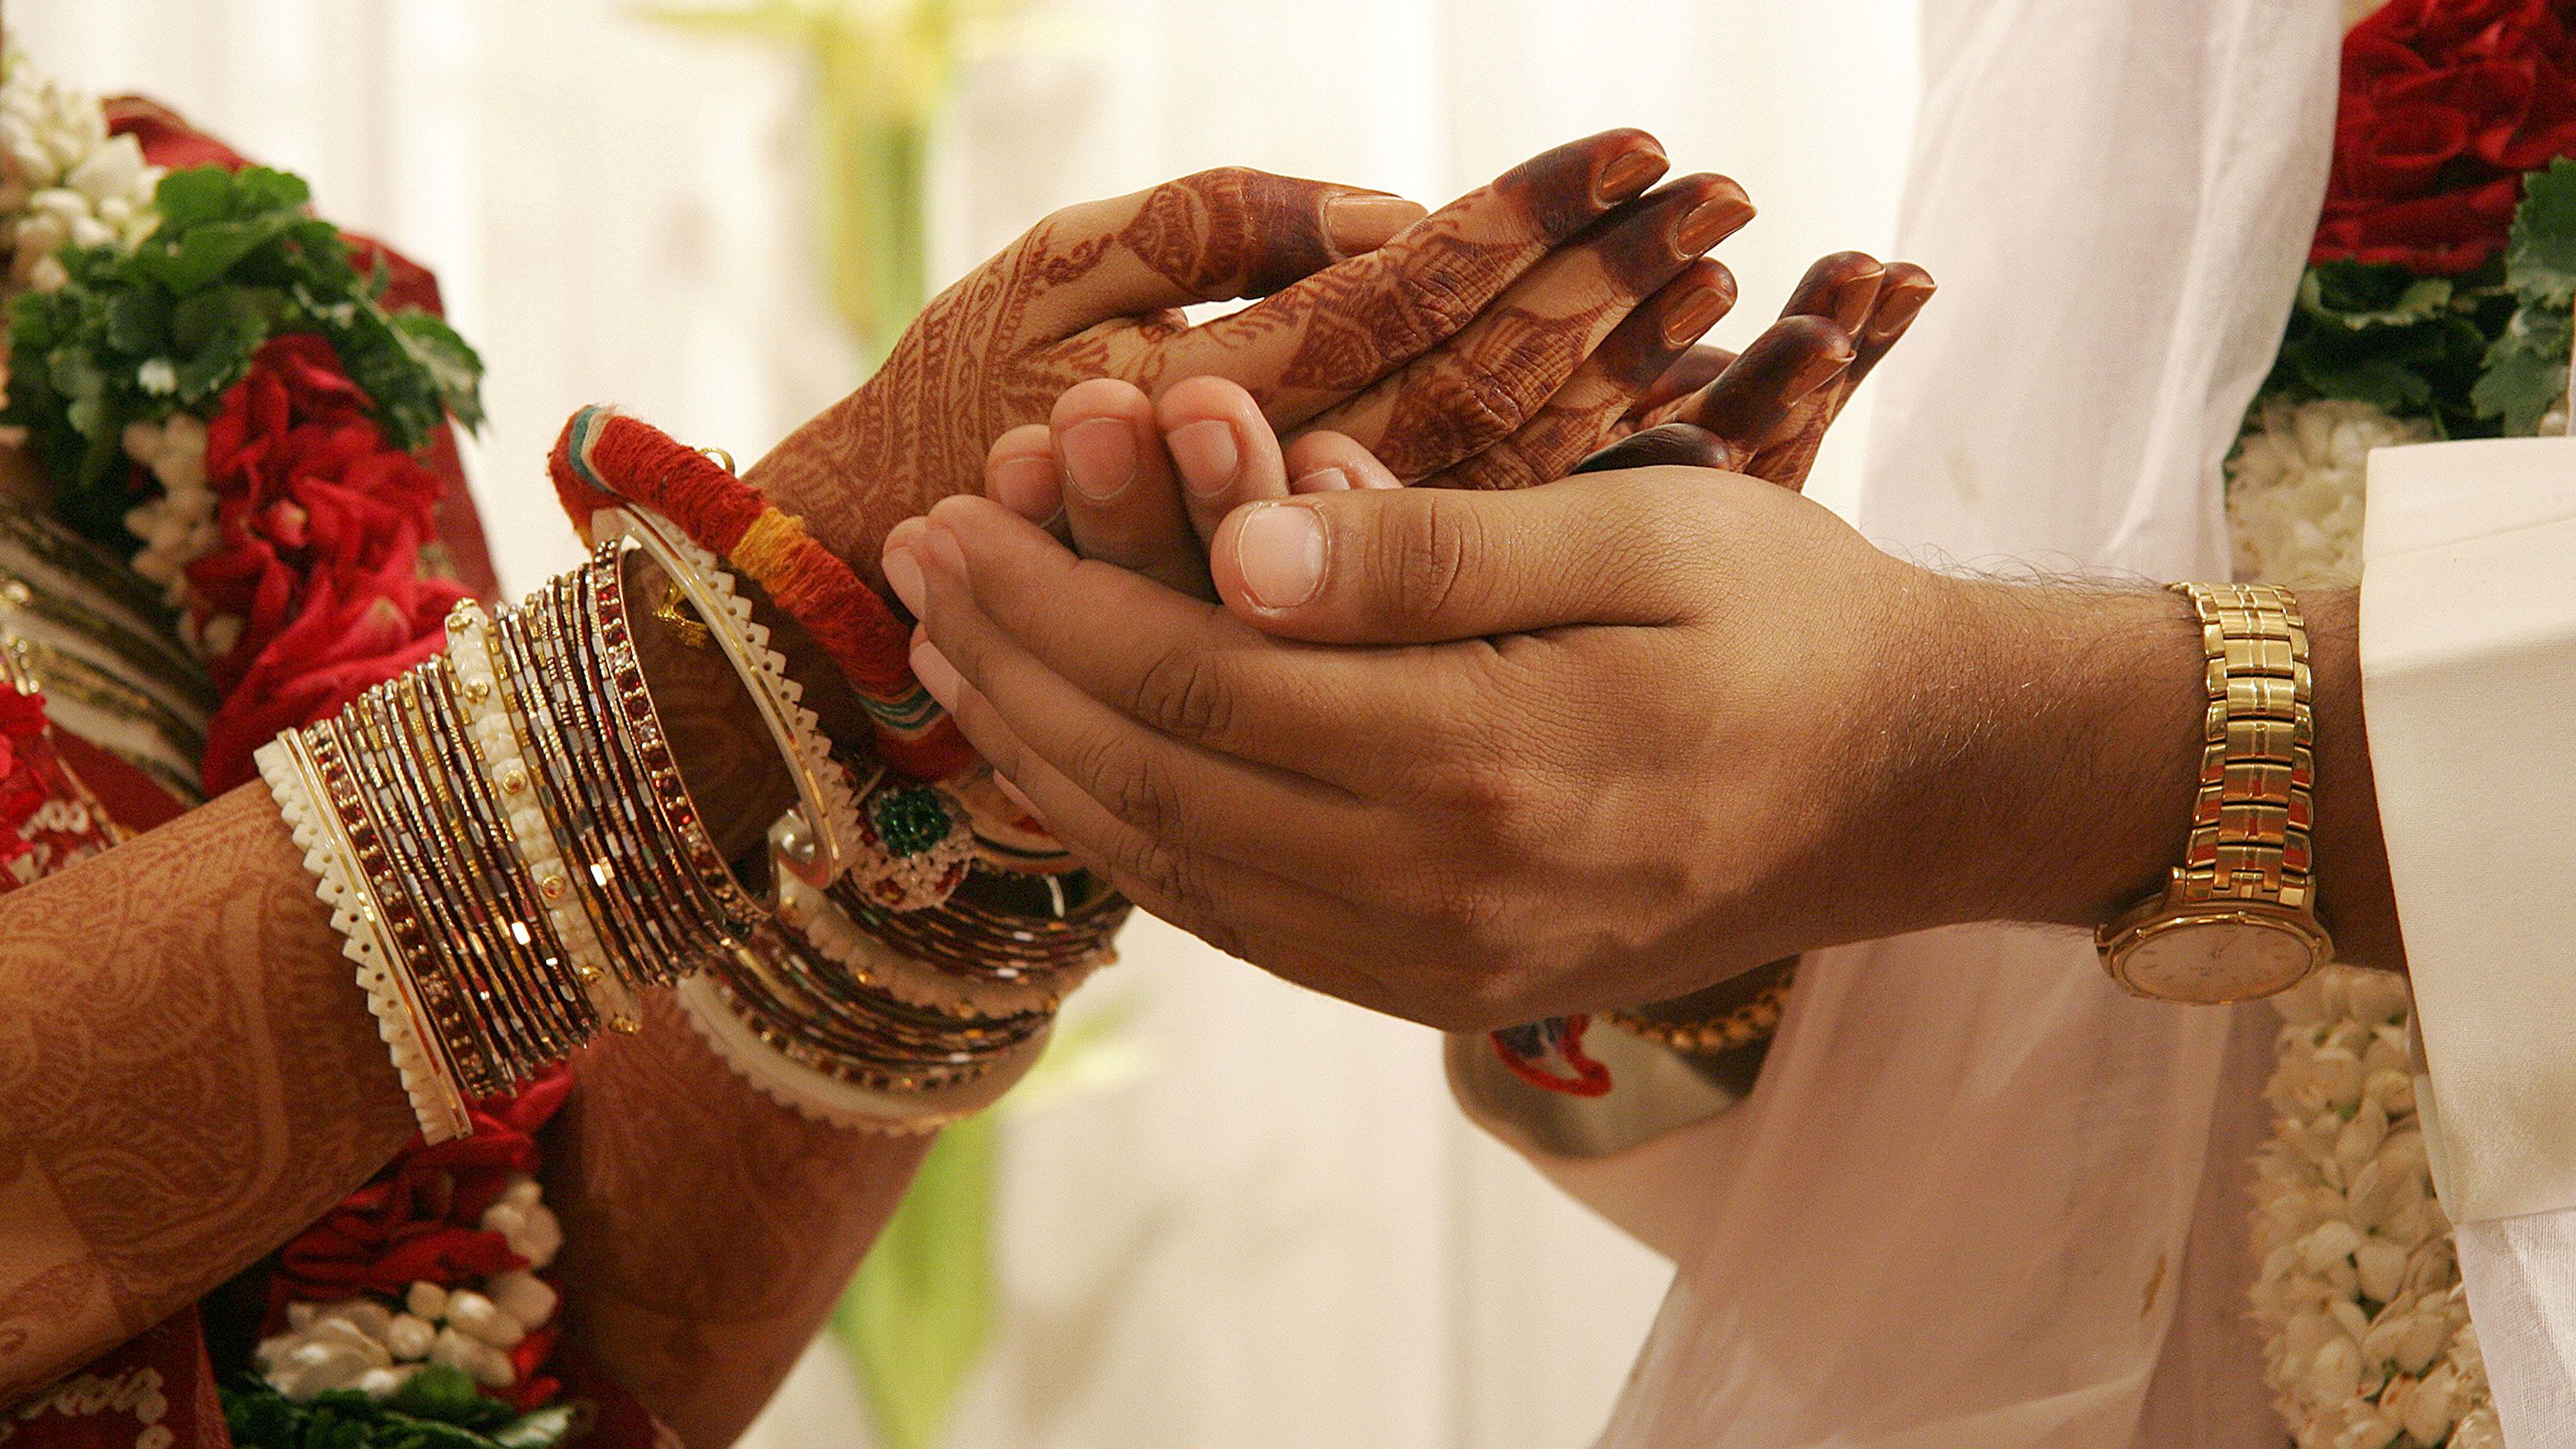 marriage customs and arranged marriages